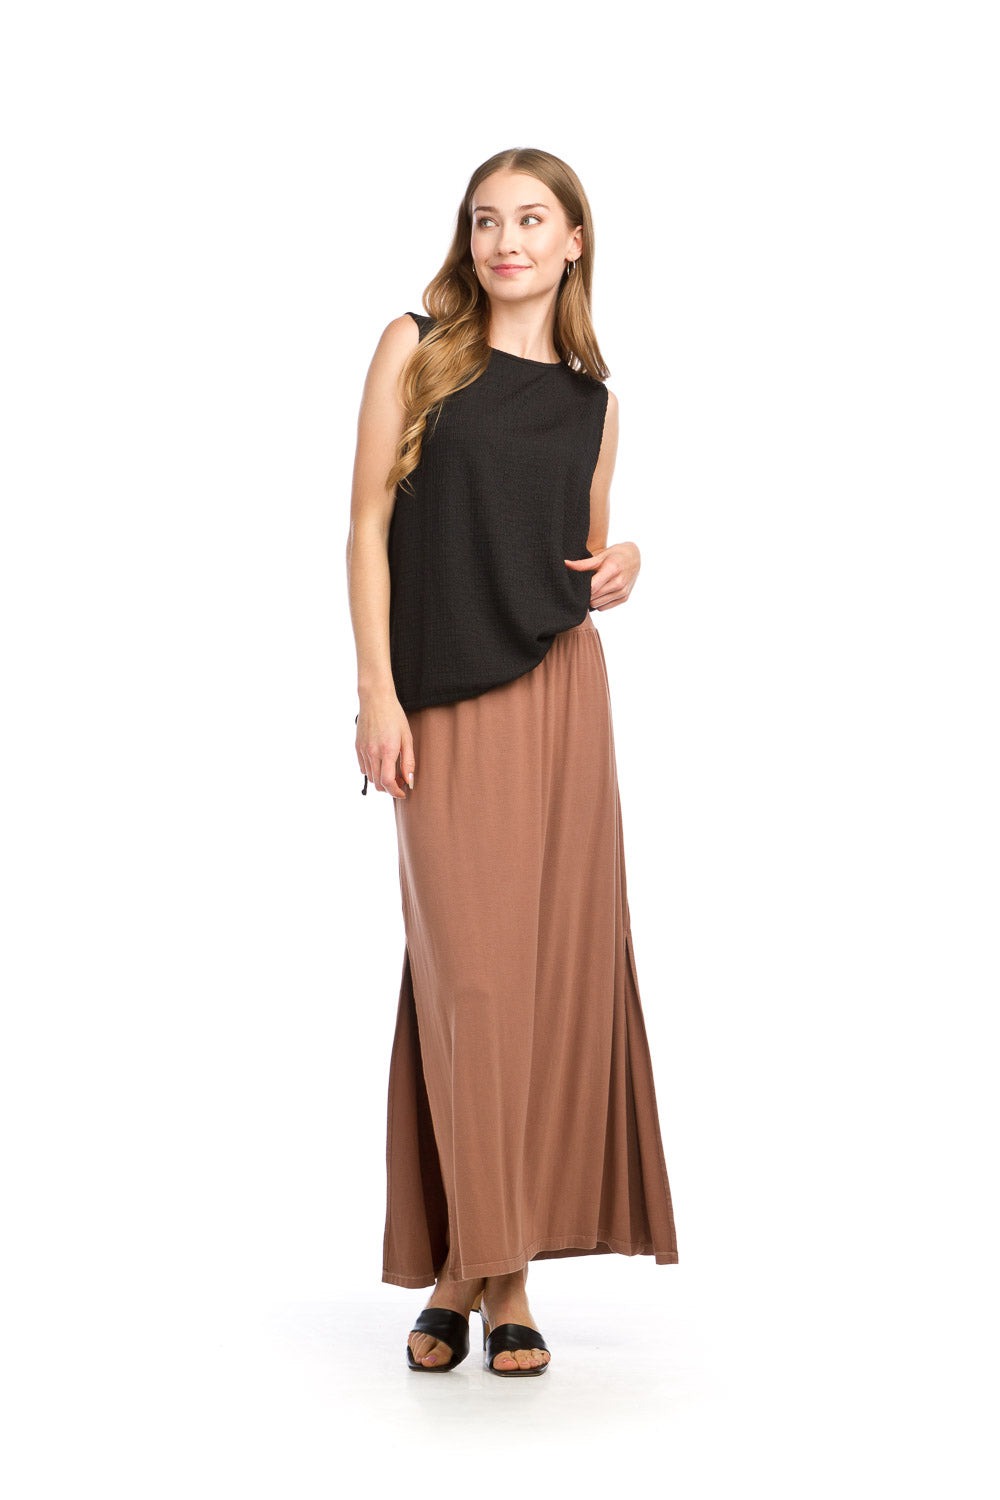 PS16915 MOCHA Bamboo Knit Maxi Skirt with Slit